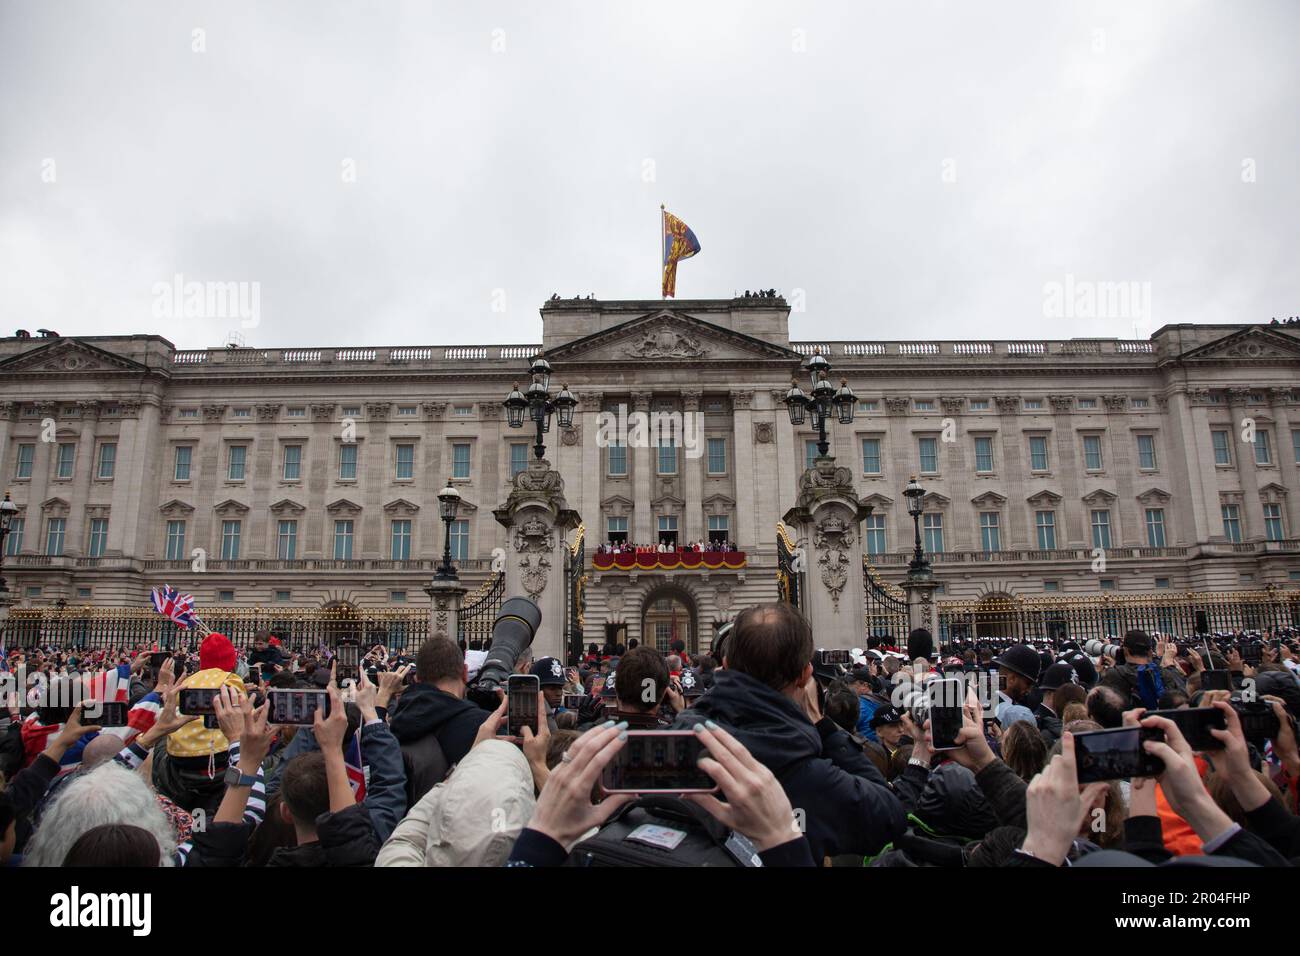 London, UK. 6th May 2023. Thousands try to get a photo as the Royal Family makes an appearance on the balcony of Buckingham Palace, following the coronation of King Charles III and Queen Camilla on Saturday, May 6th, 2023. Credit: Kiki Streitberger / Alamy Live News Stock Photo